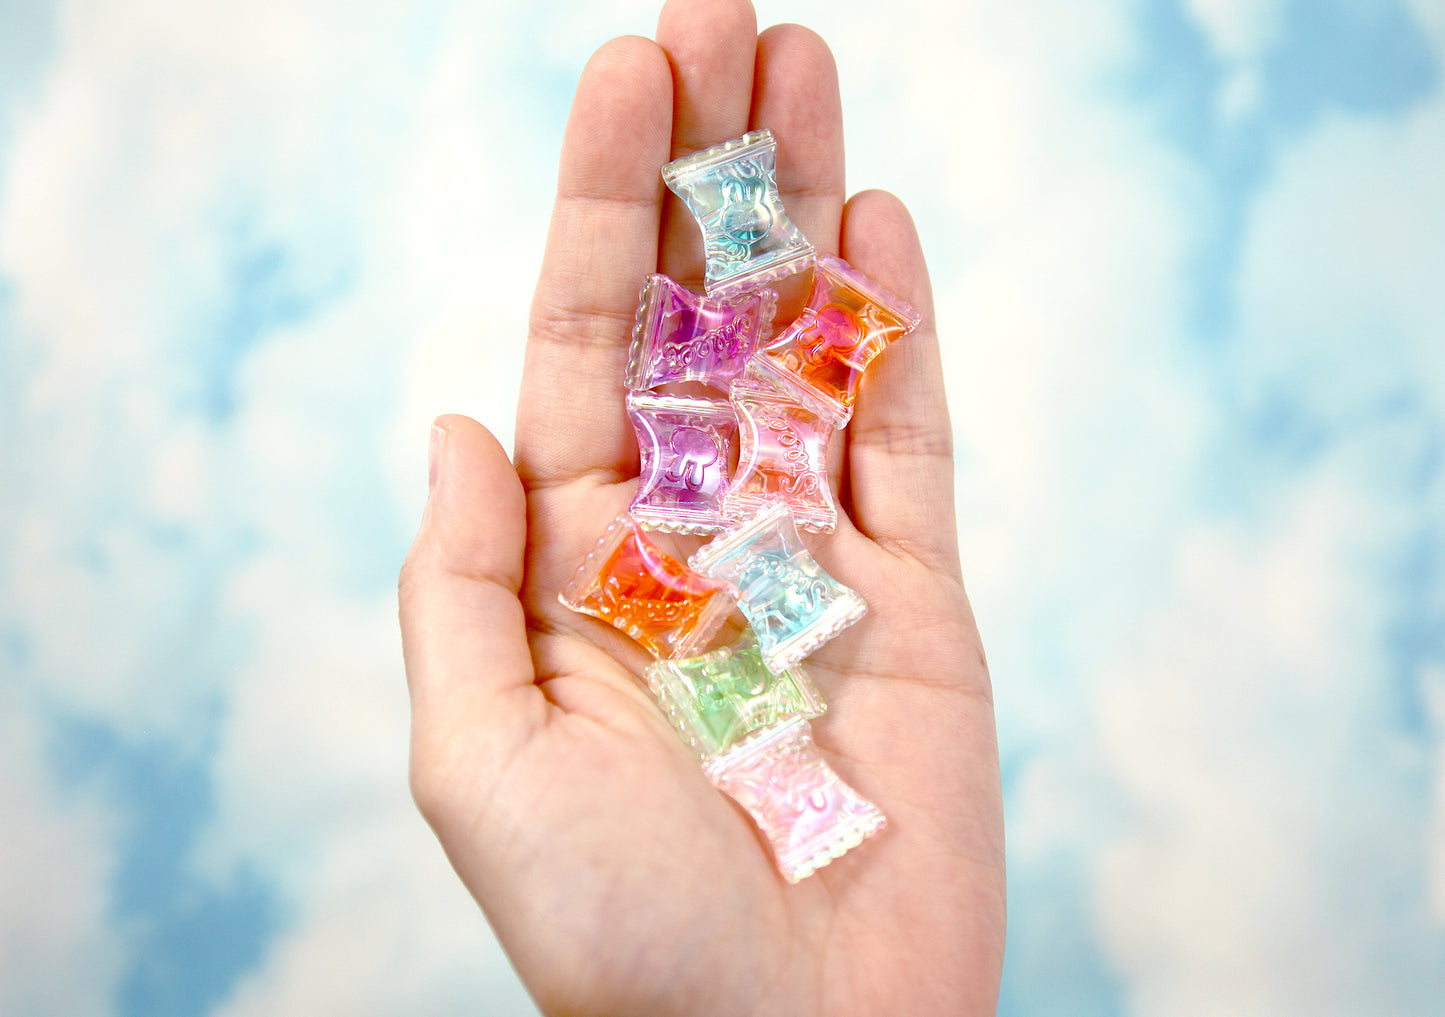 Candy Beads - 21mm Colorful Candies Wrapped Candy Shape Acrylic or Resin Beads - 15 pc set